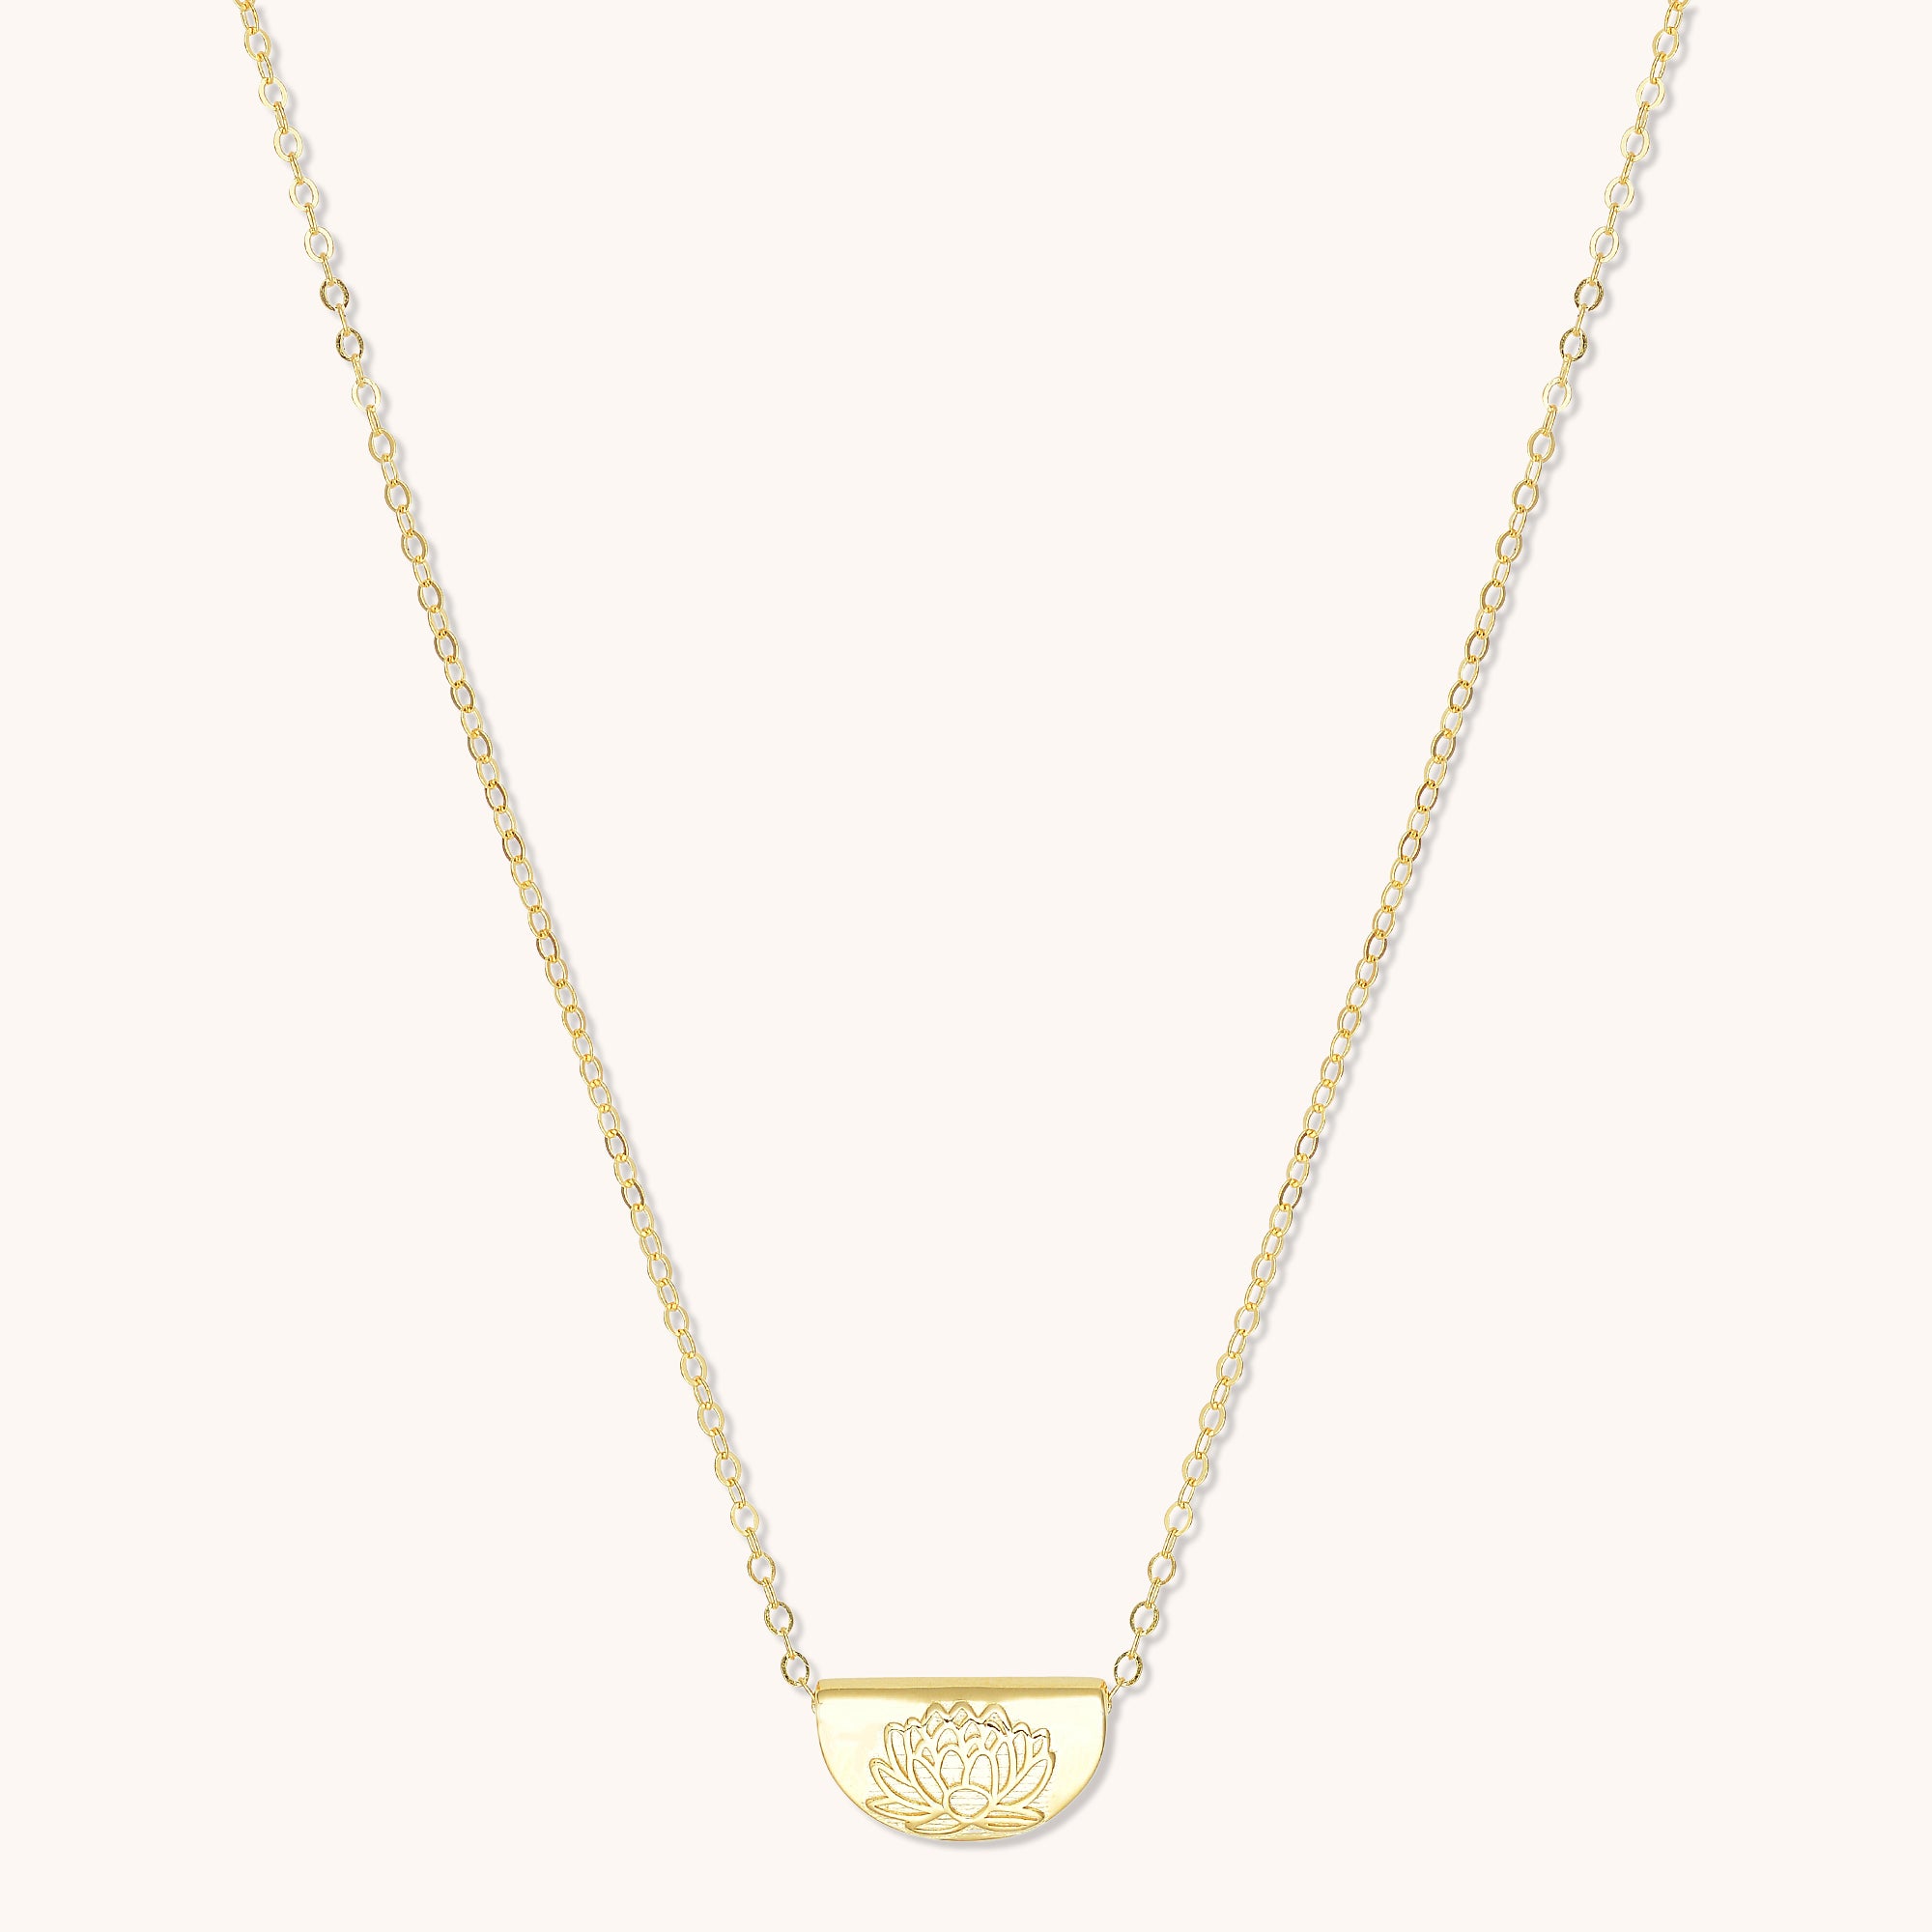 Birth Flower Necklace July (Lotus) Gold